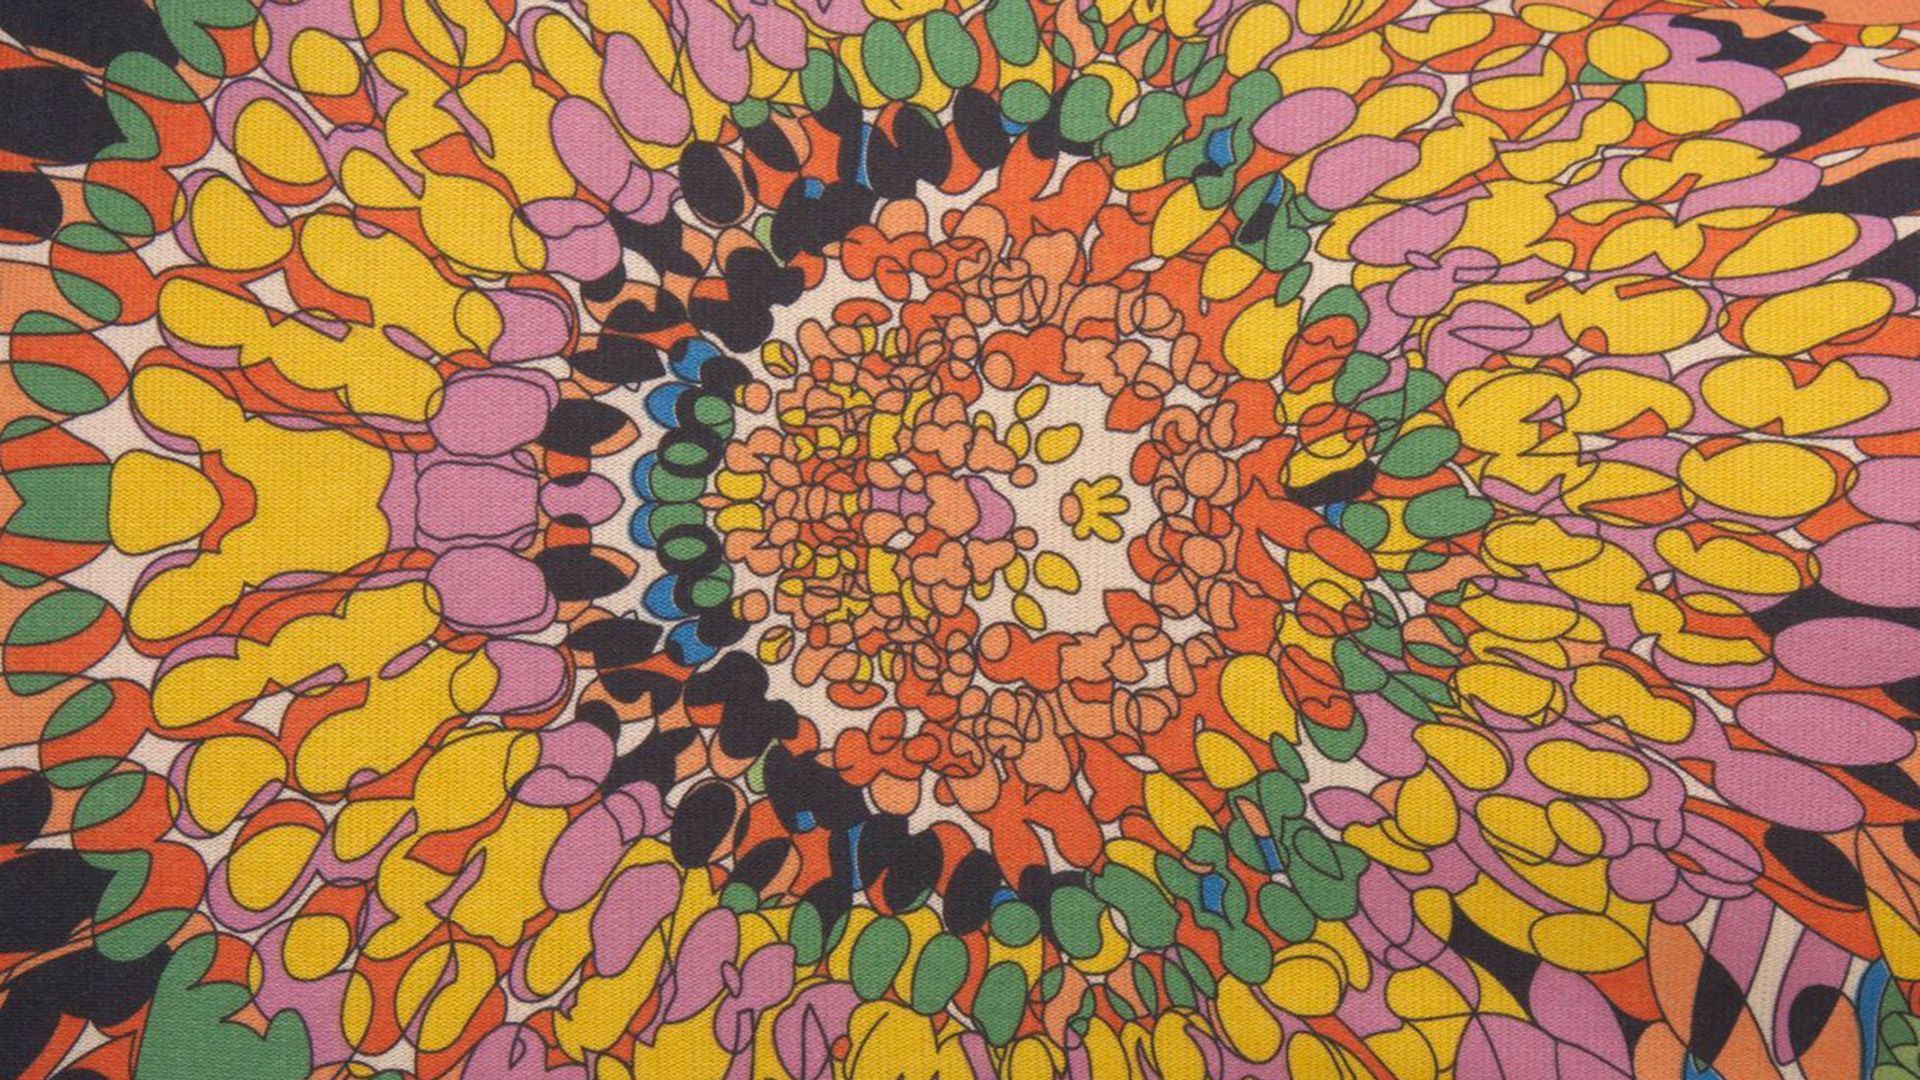 A colorful, abstract pattern of a flower on a piece of fabric - 70s, psychedelic